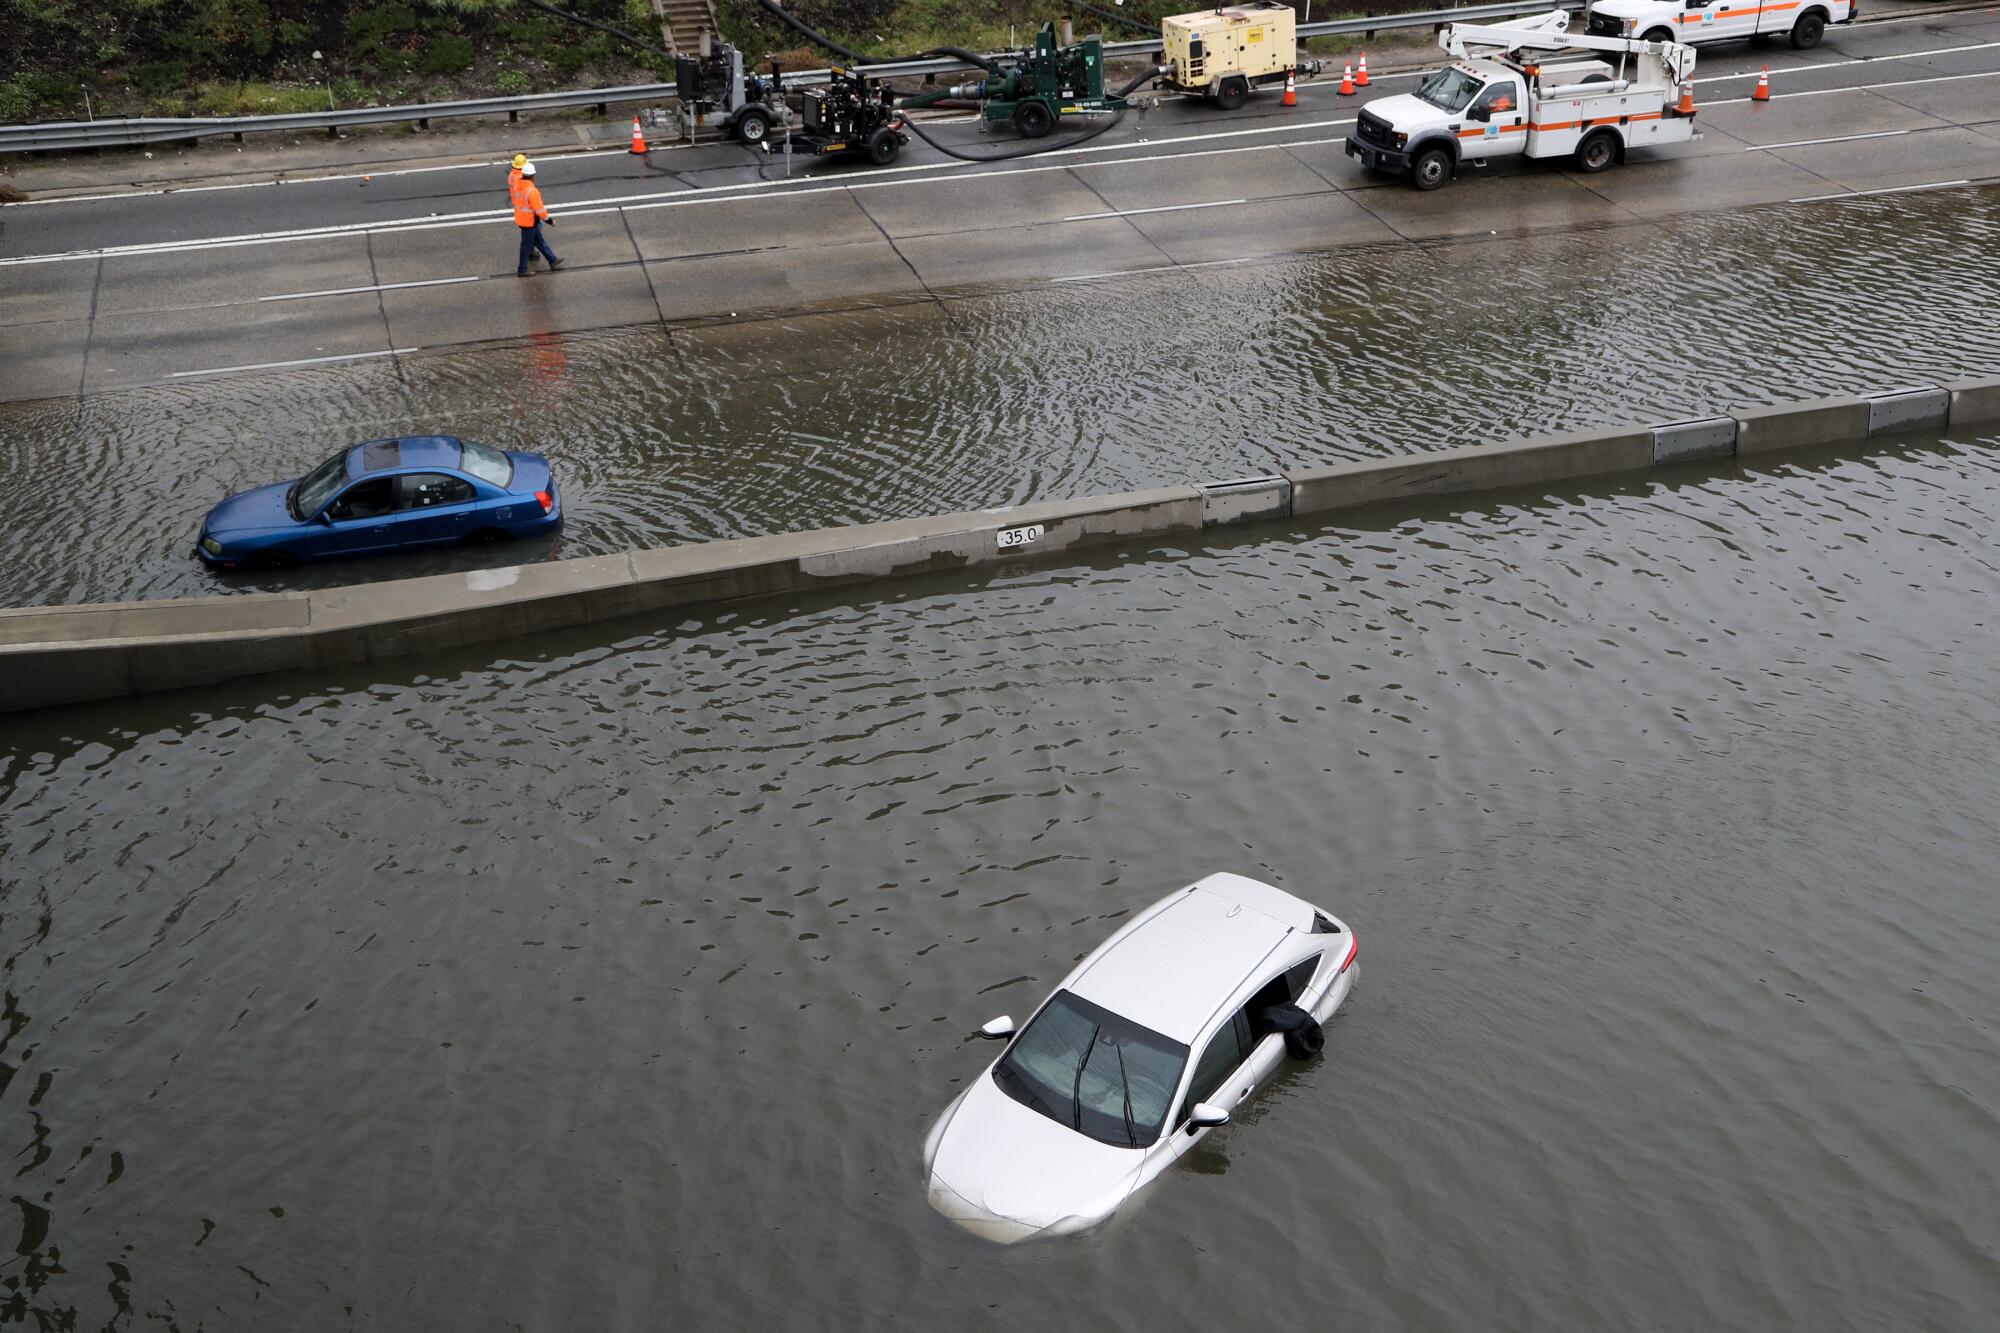 Vehicles are partially submerged as Caltrans crews work to pump storm water off Interstate 5